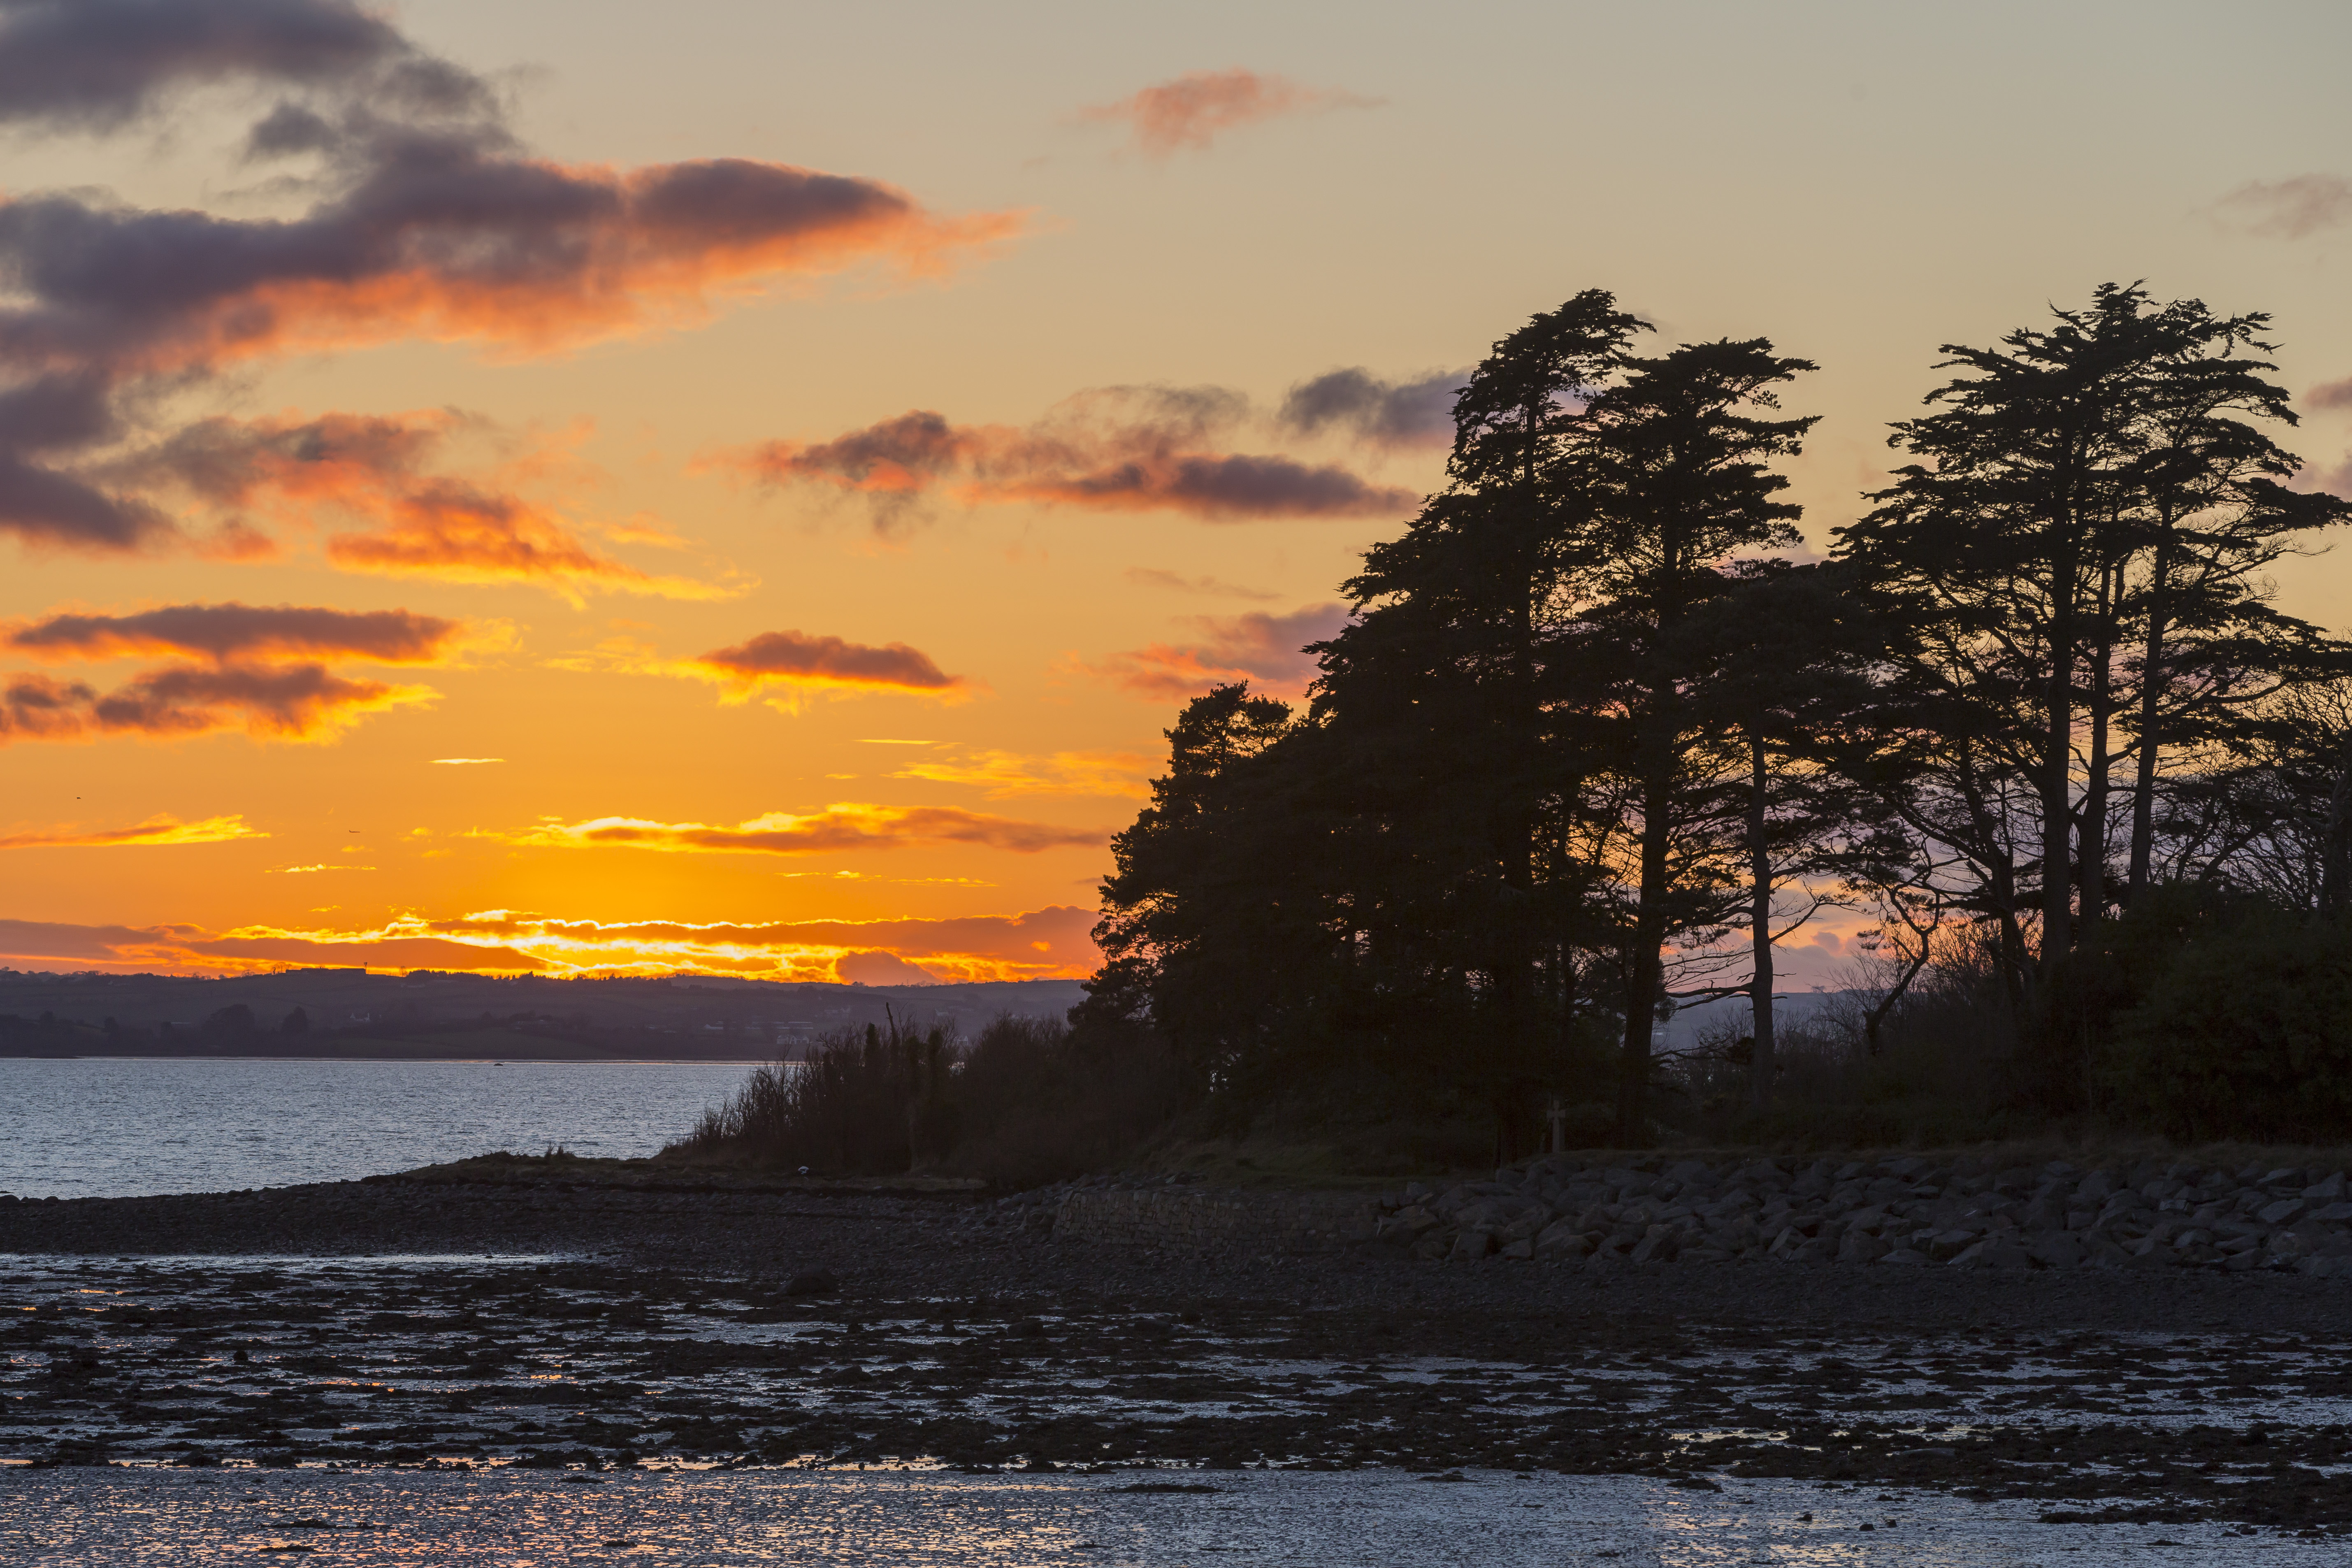 Sunset on the shore of Strangford Lough, at Mount Stewart, County Down